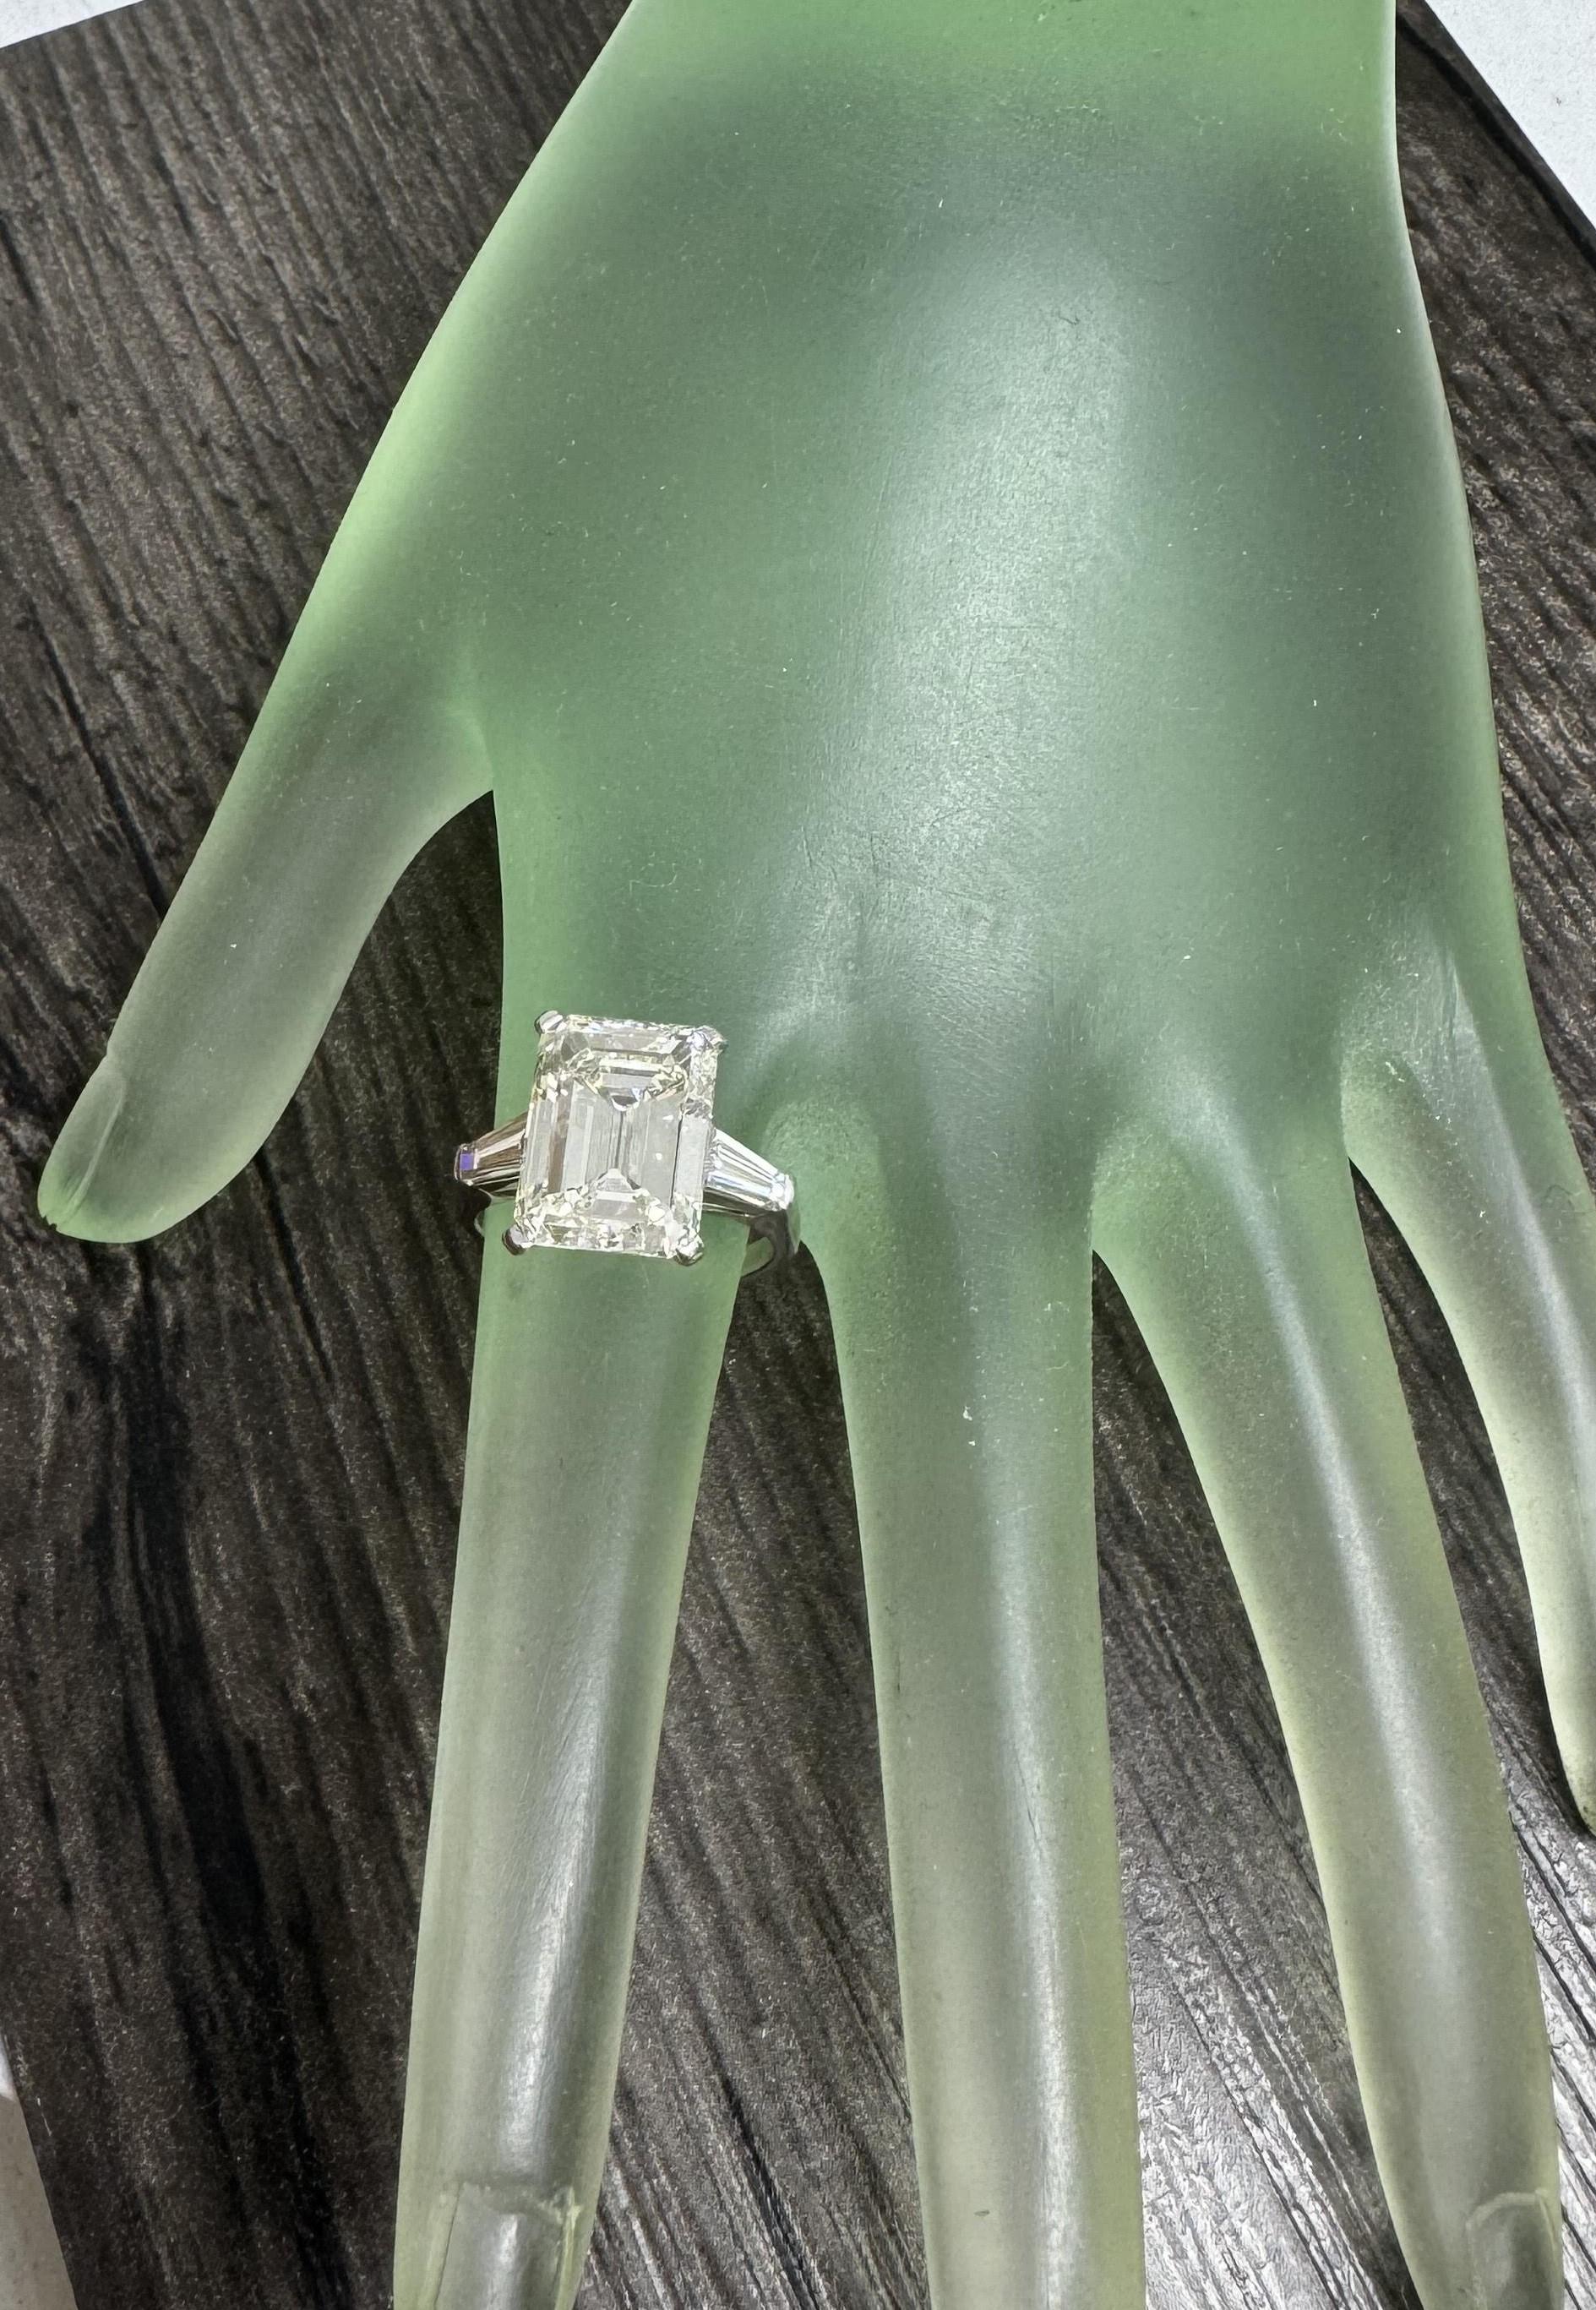 GIA Certified 6.57cts. Emerald Cut Classic Diamond set in Platinum with 2 tapper baguette cut diamonds 
*Motivated to Sell – Please make a Fair Offer*
Specifications:
    main stone: Diamond  6.57cts. Emerald Cut
    certification: GIA Certified
   